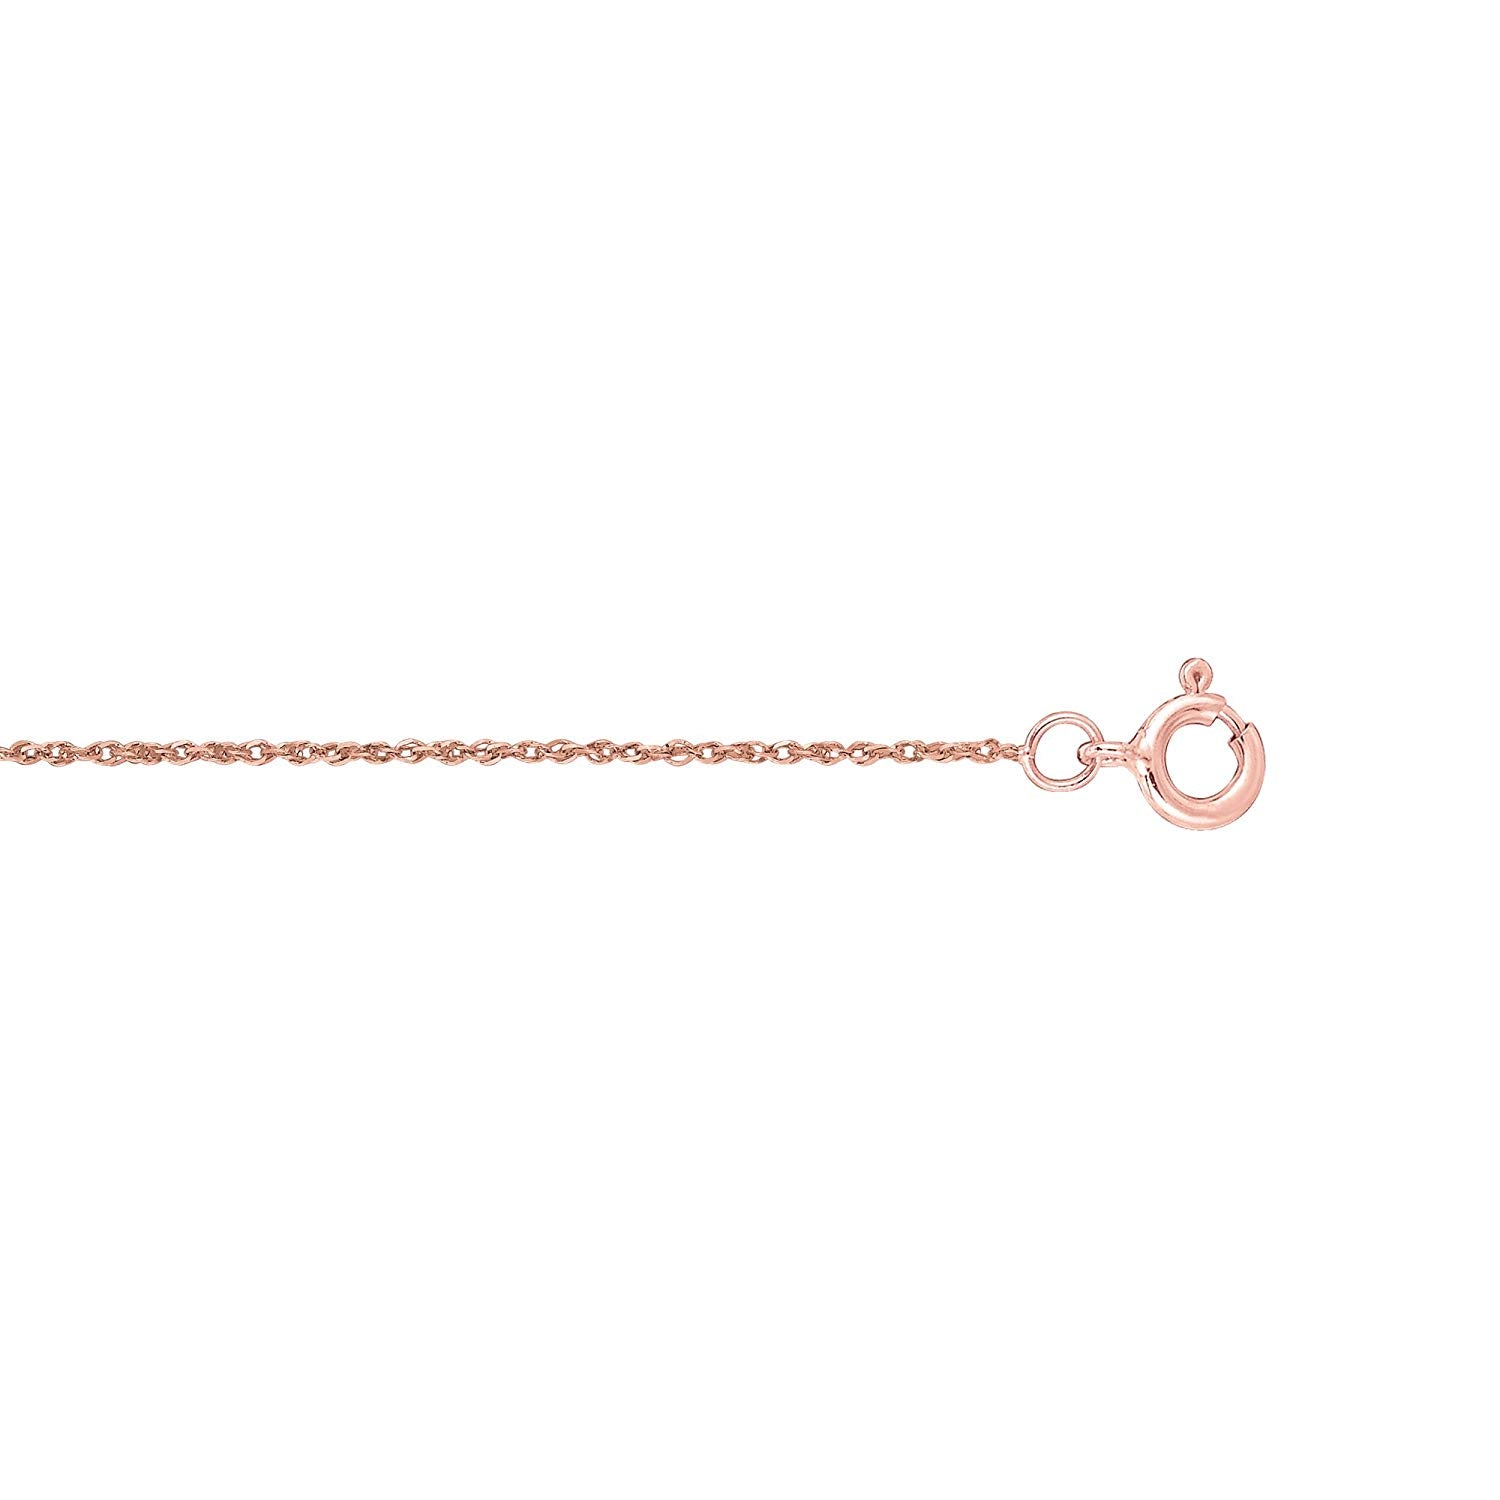 14k Rose Gold Rope Chain Necklace, 0.6mm fine designer jewelry for men and women